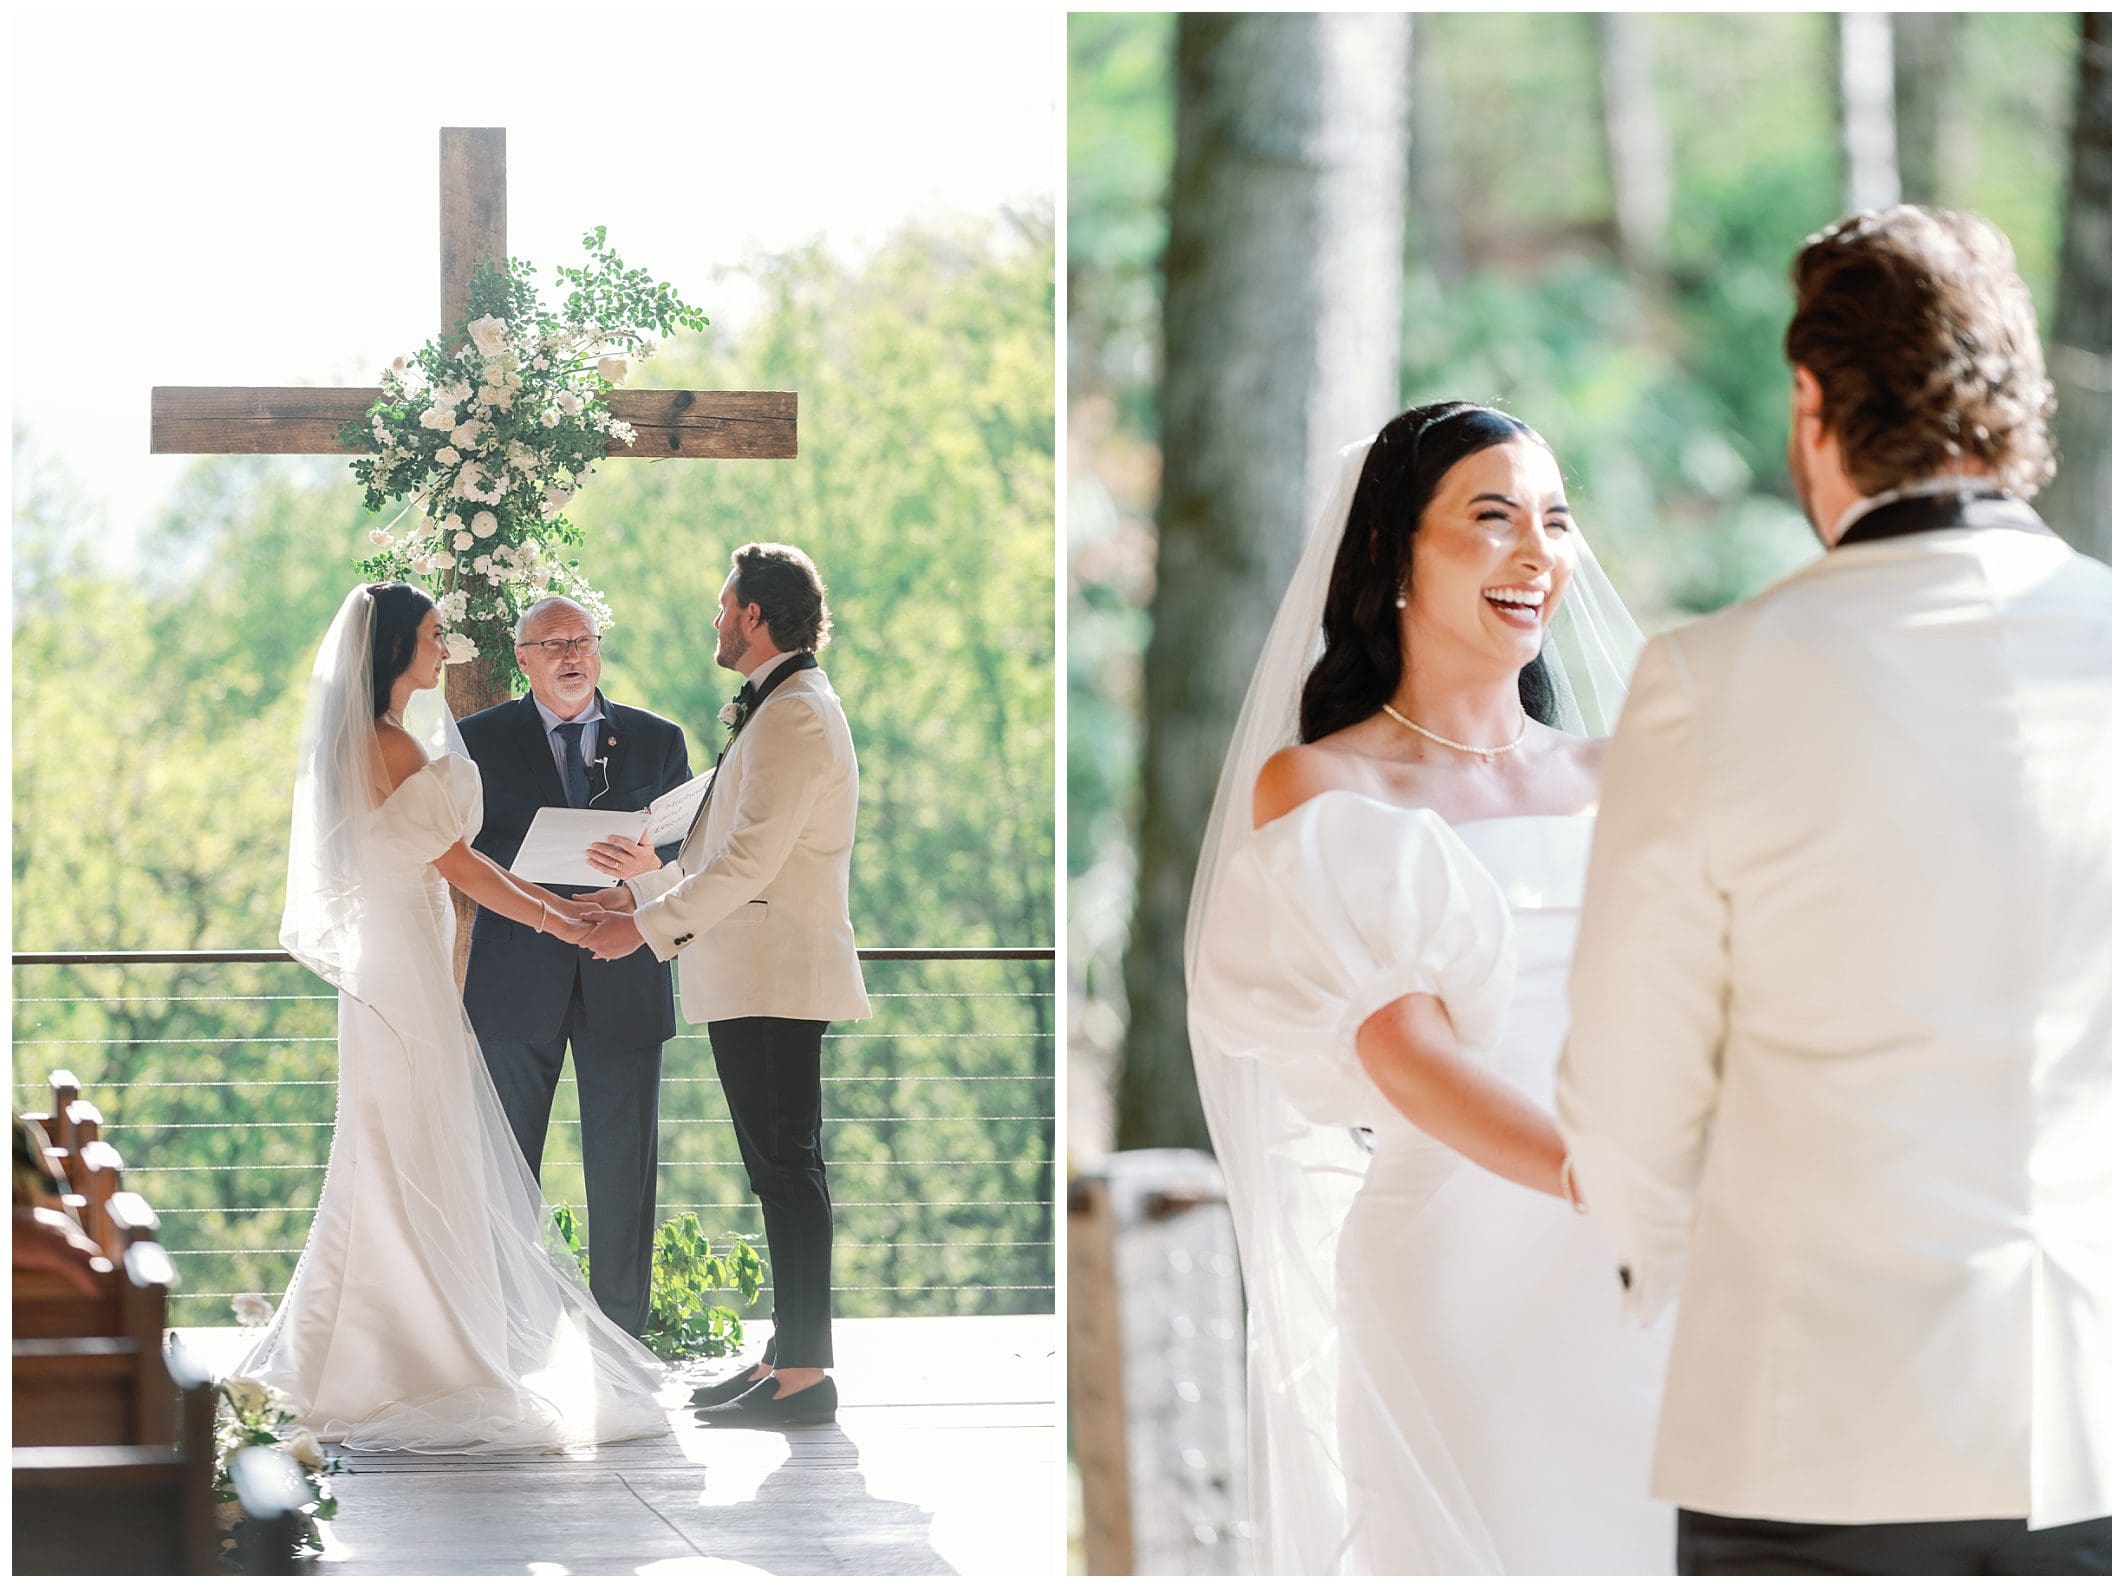 Bride and groom exchanging vows at an outdoor altar under a wooden cross adorned with flowers, and a close-up of the bride smiling at the groom.